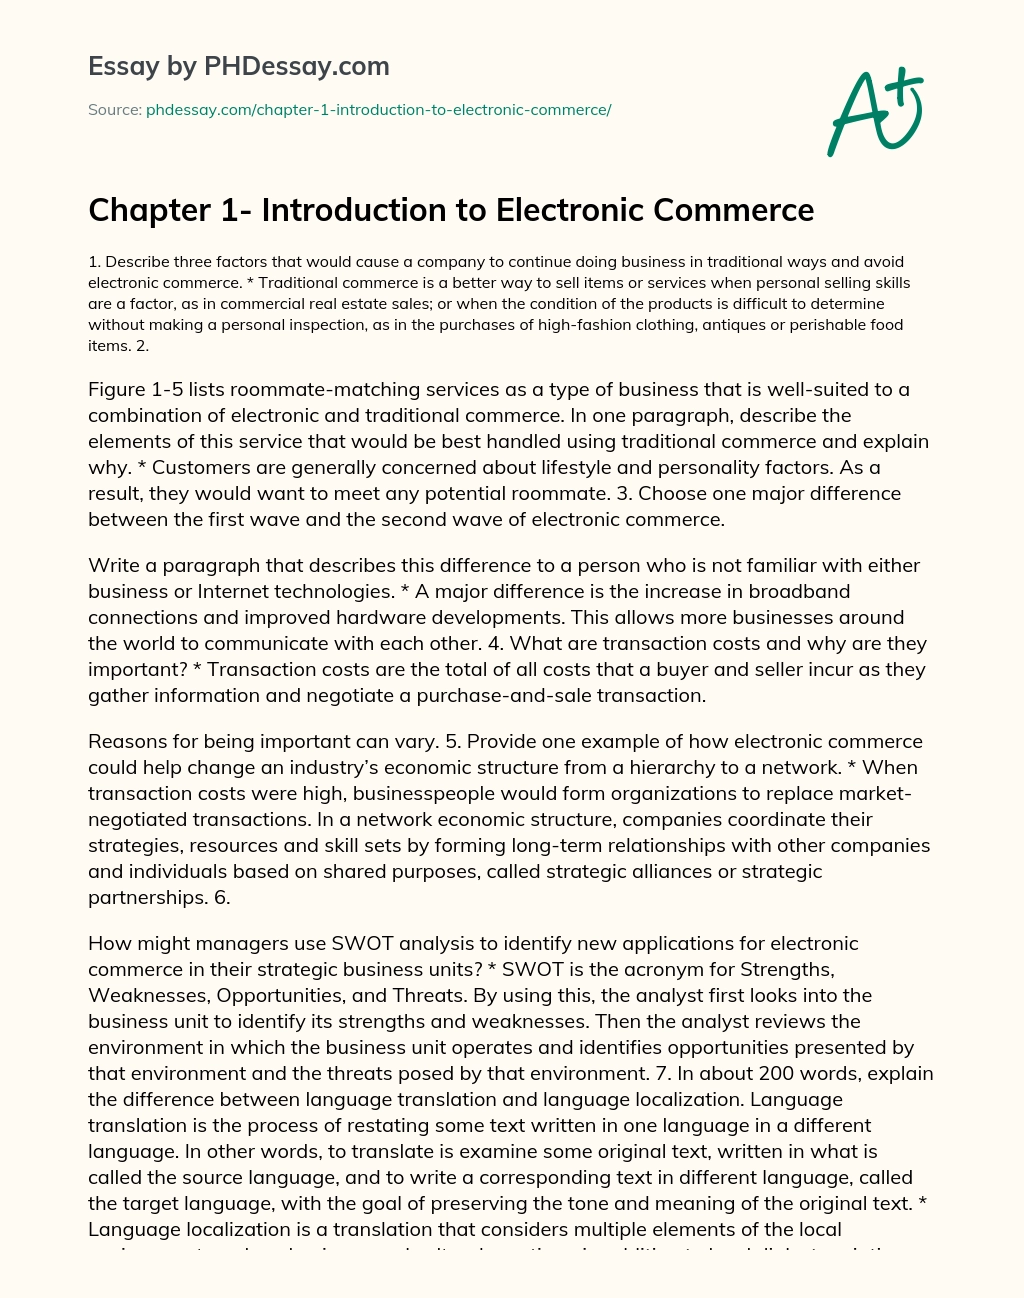 Chapter 1- Introduction to Electronic Commerce essay